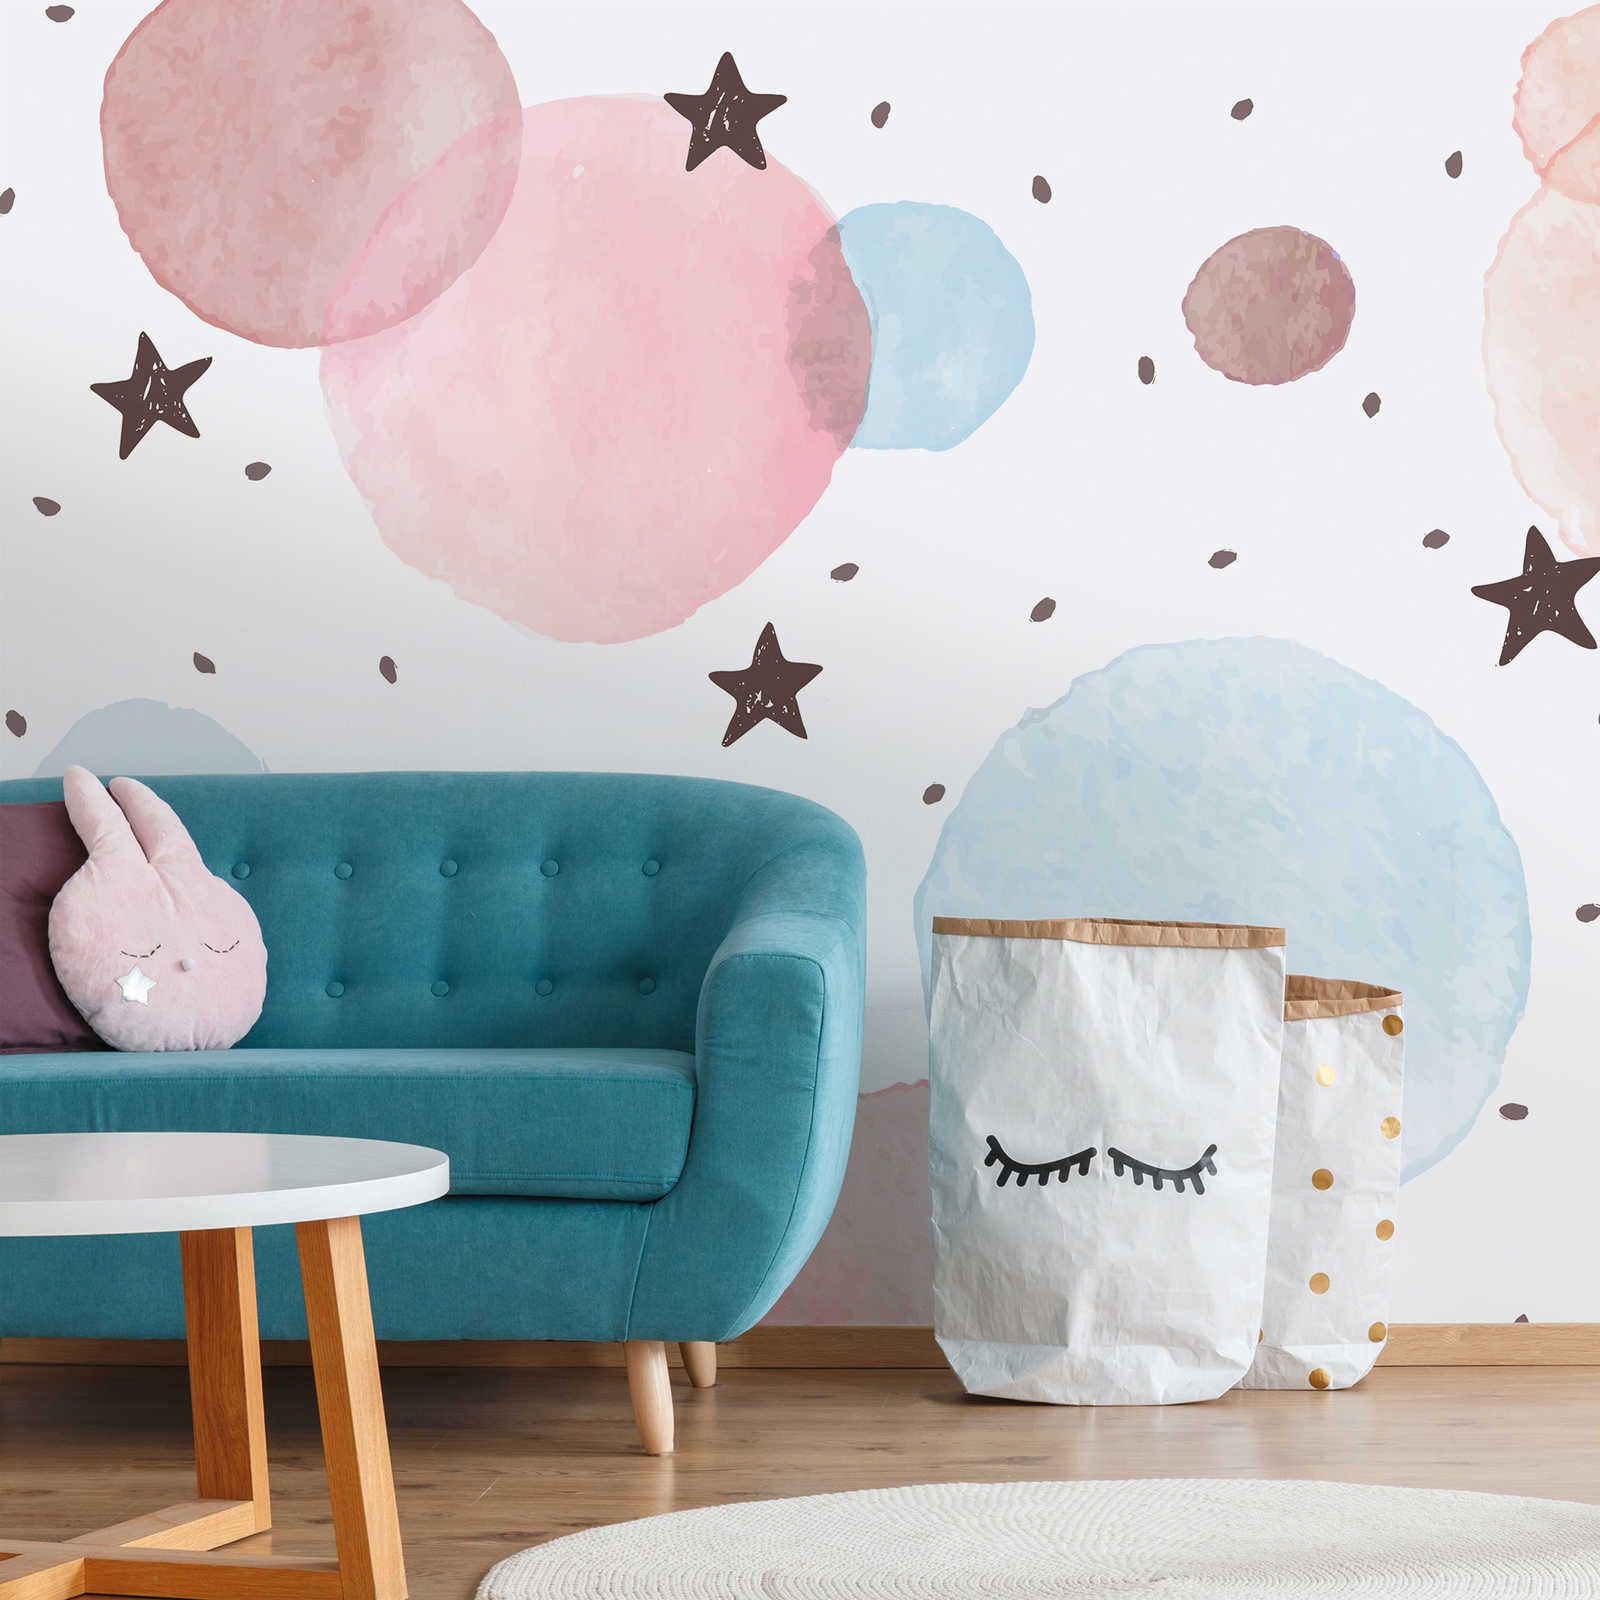 Photo wallpaper for children's room with stars, dots and circles - Smooth & matt non-woven
